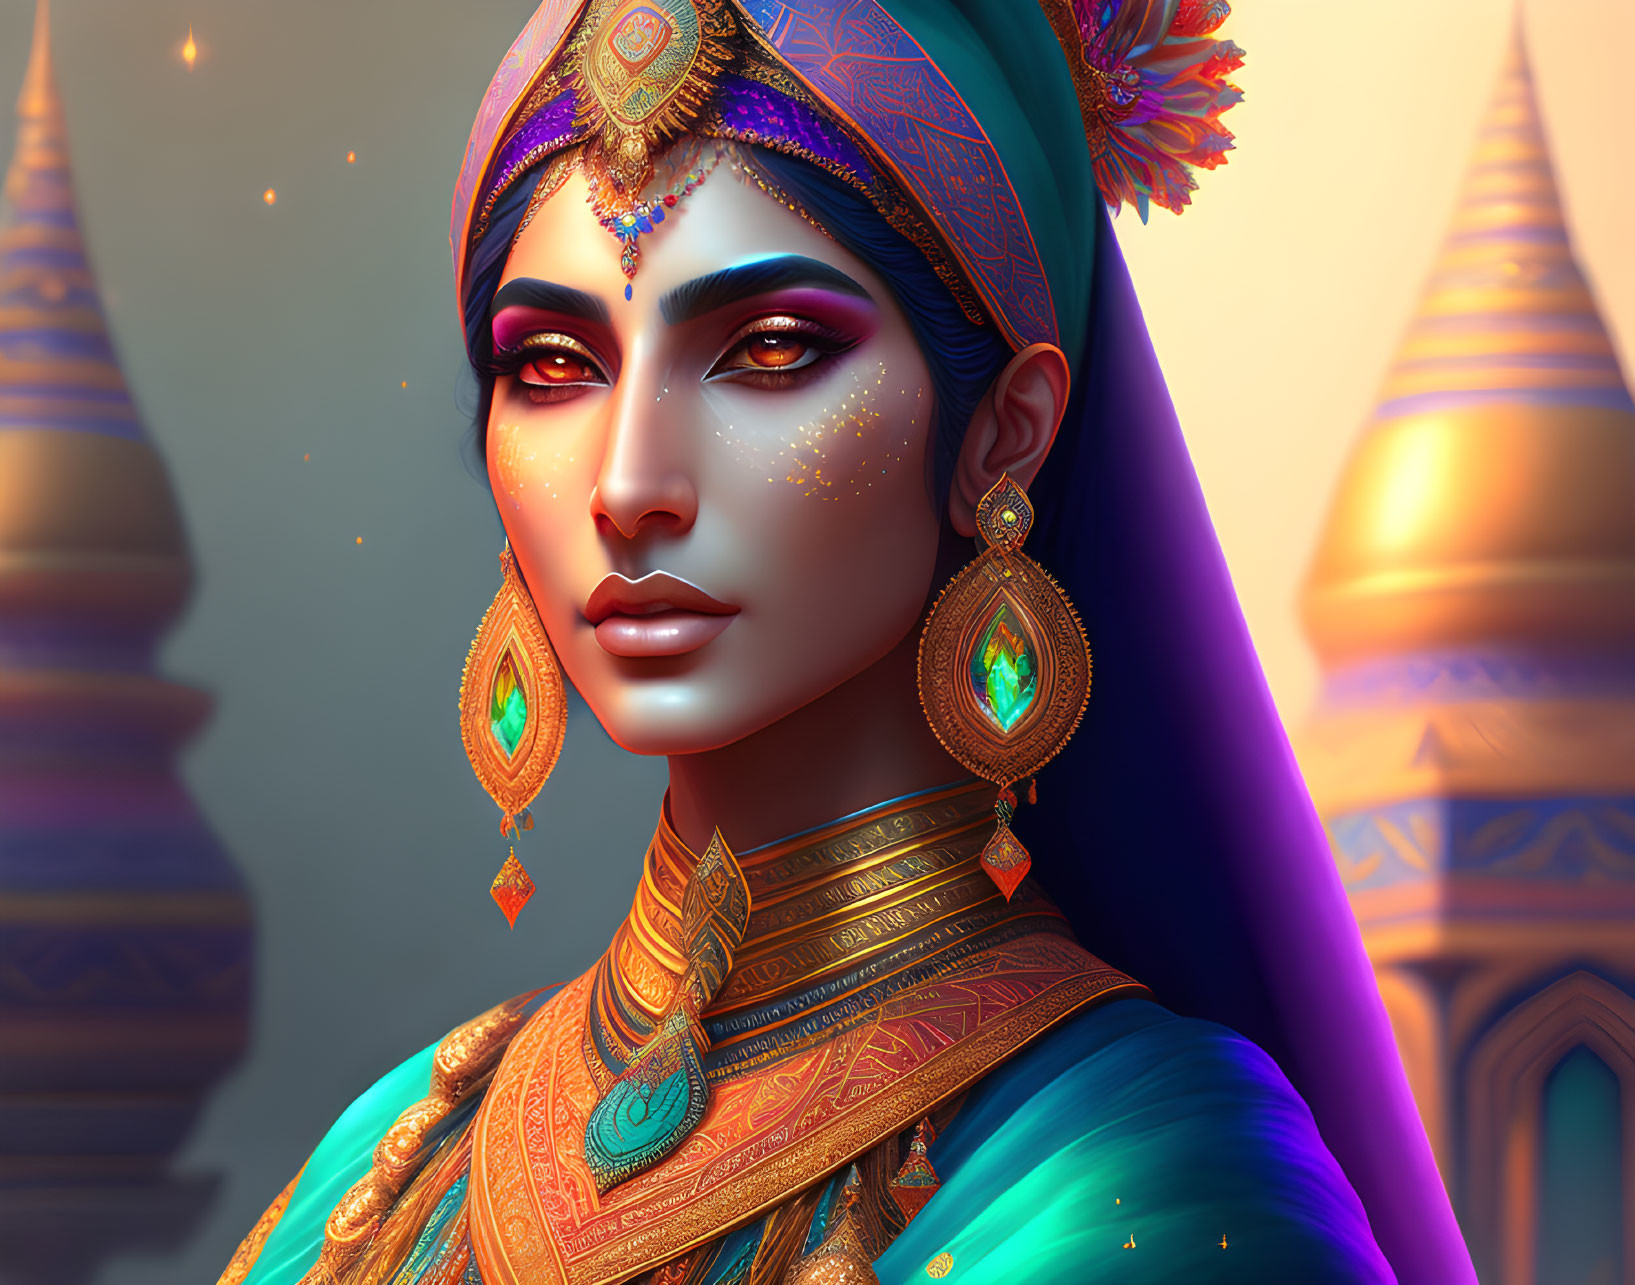 Digital art portrait of woman in traditional Indian attire with architectural domes background.